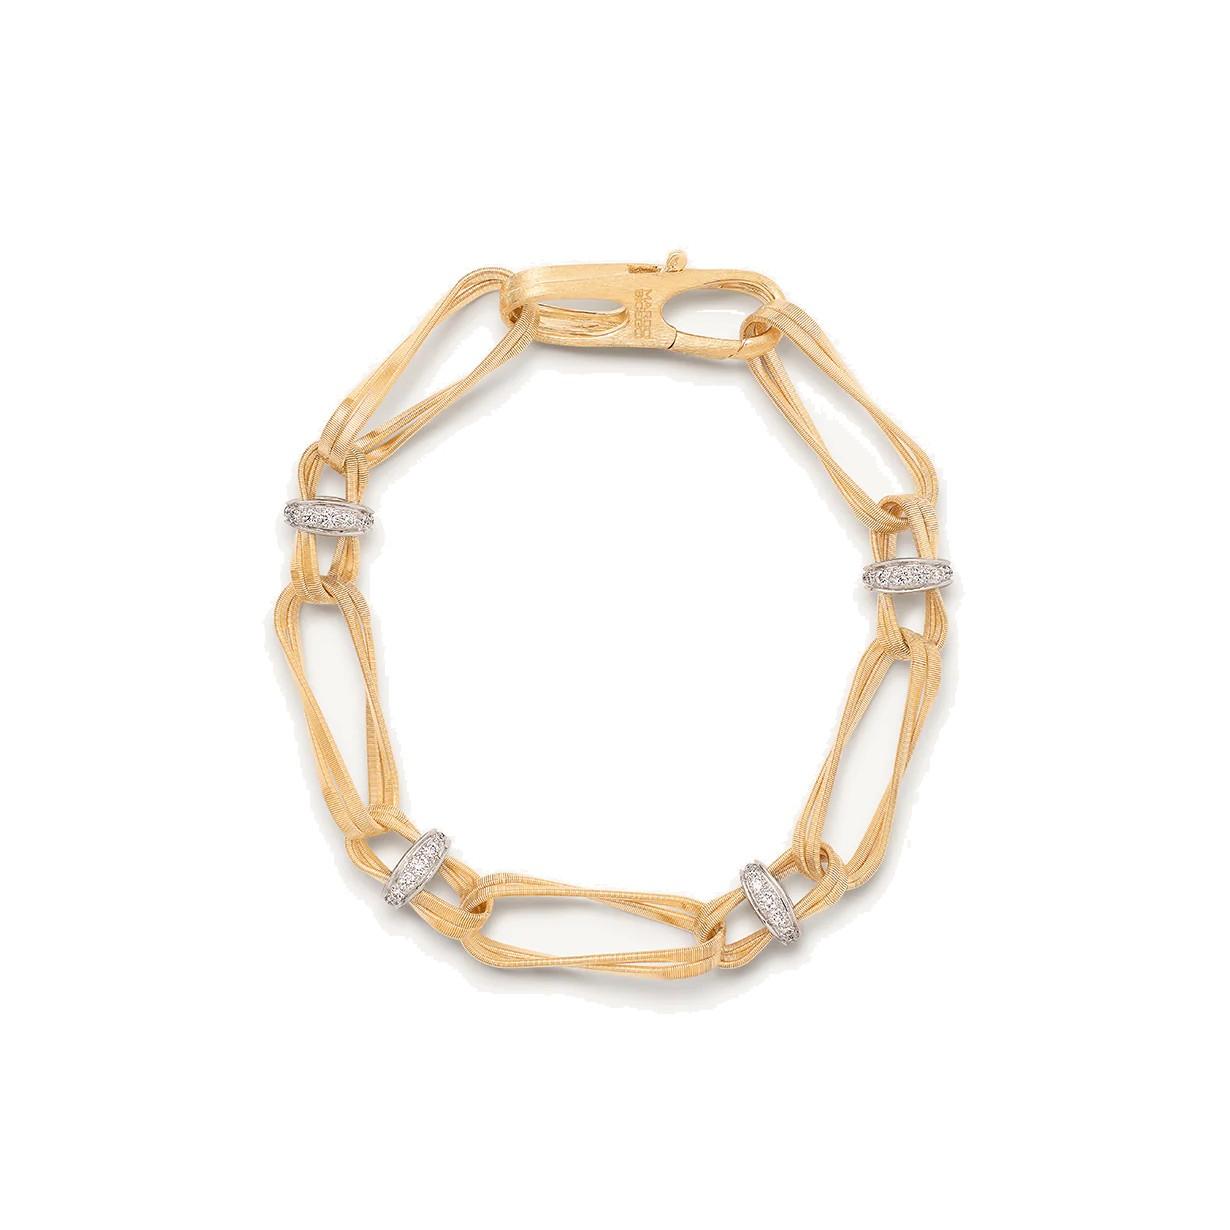 Marco Bicego Marrakech Onde Twisted Double Coil Link Bracelet with Diamonds